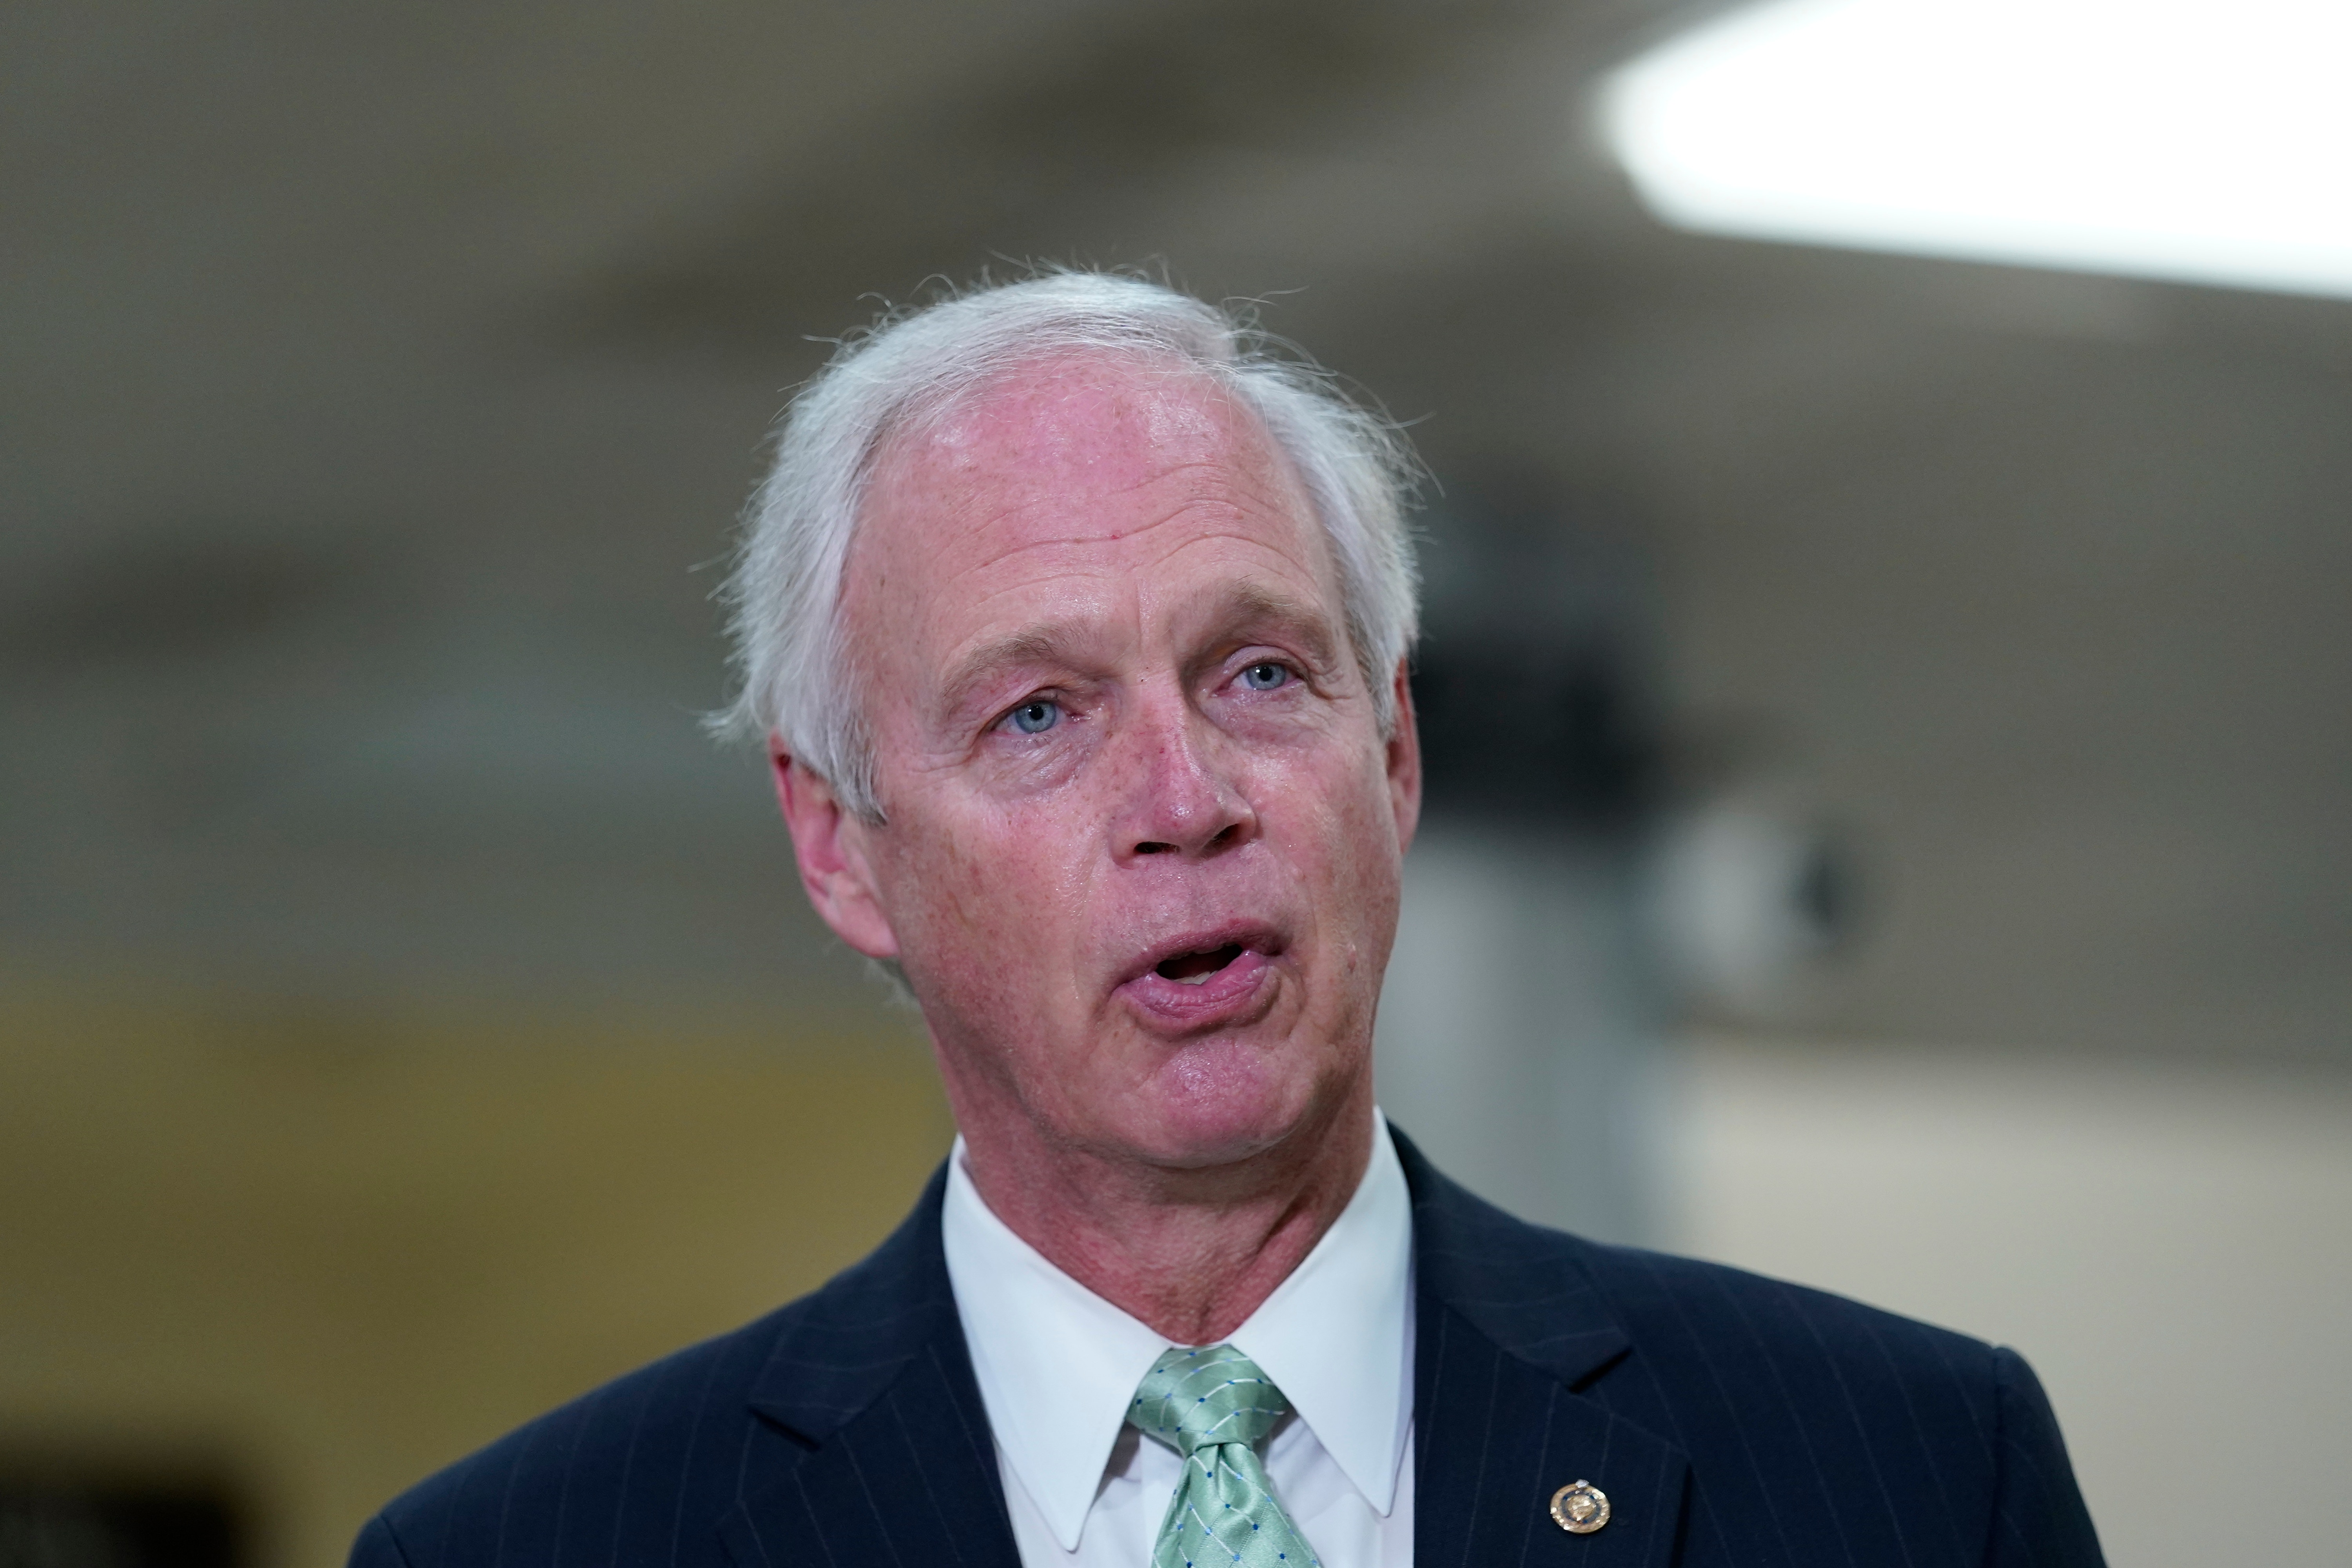 Sen. Johnson previews Capitol riot hearing: Attack 'was not foreseeable'